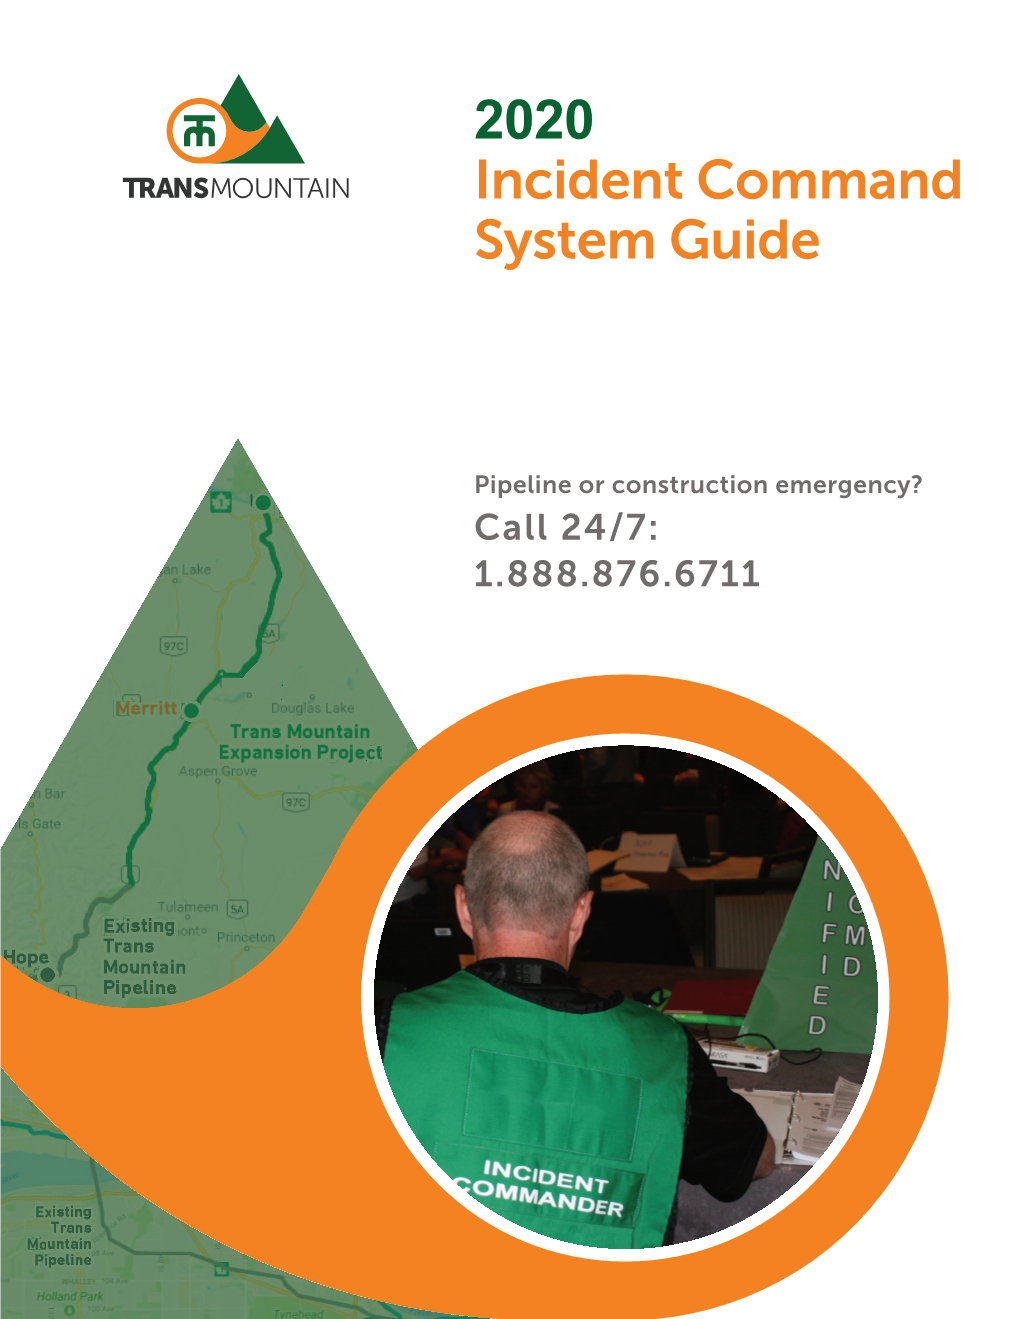 2020 Incident Command System Guide